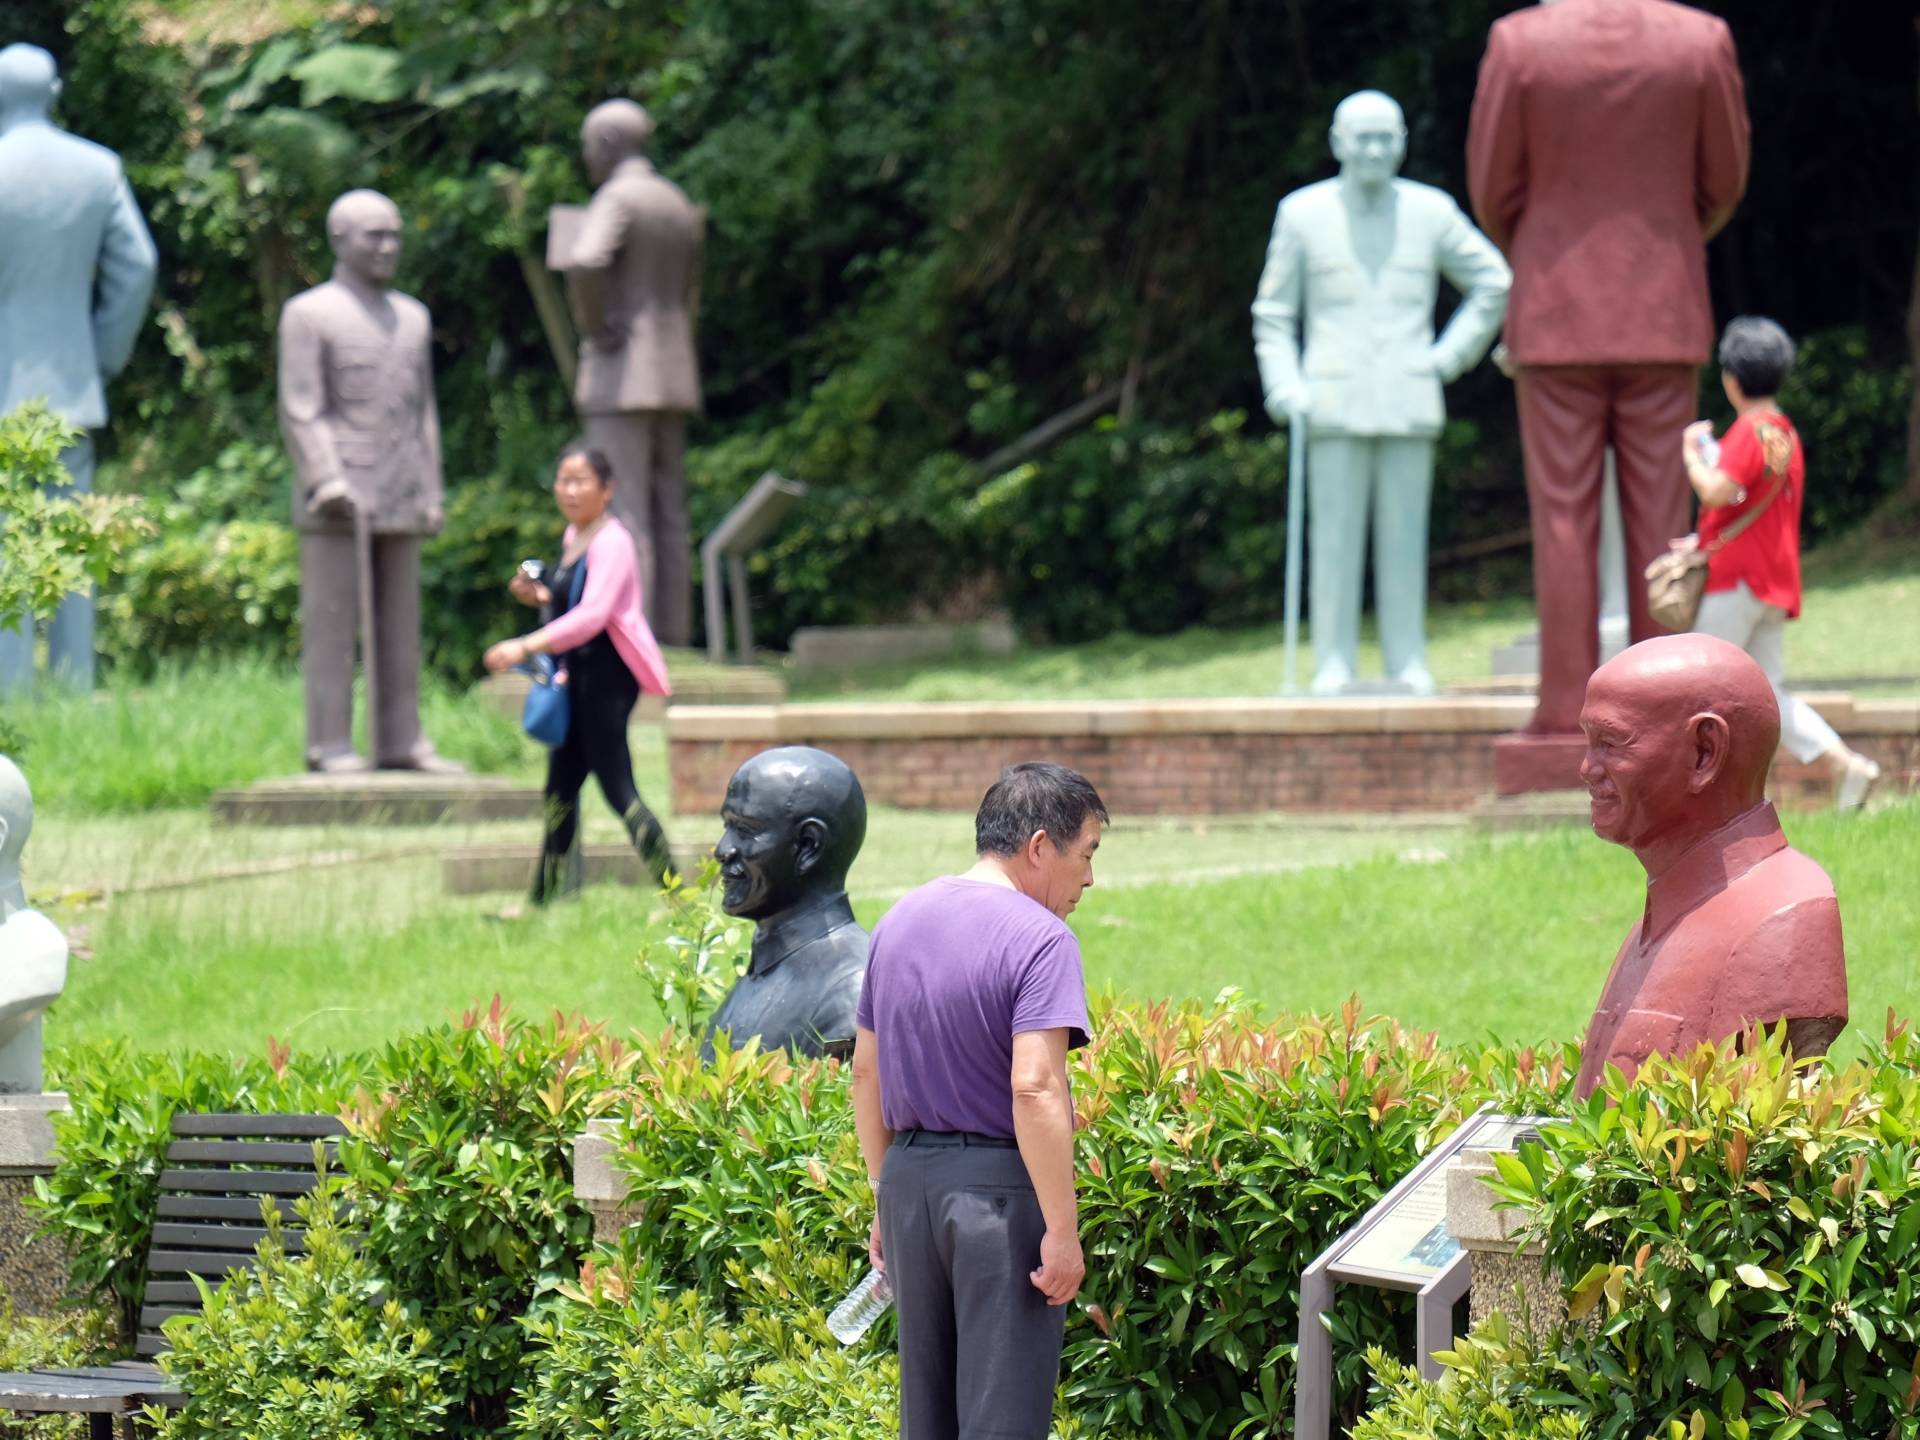 Chinese tourists visit the park in northern Taiwan that is home to more than 200 statues of late nationalist leader Chiang Kai-shek in 2015. Sam Yeh/AFP/Getty Images